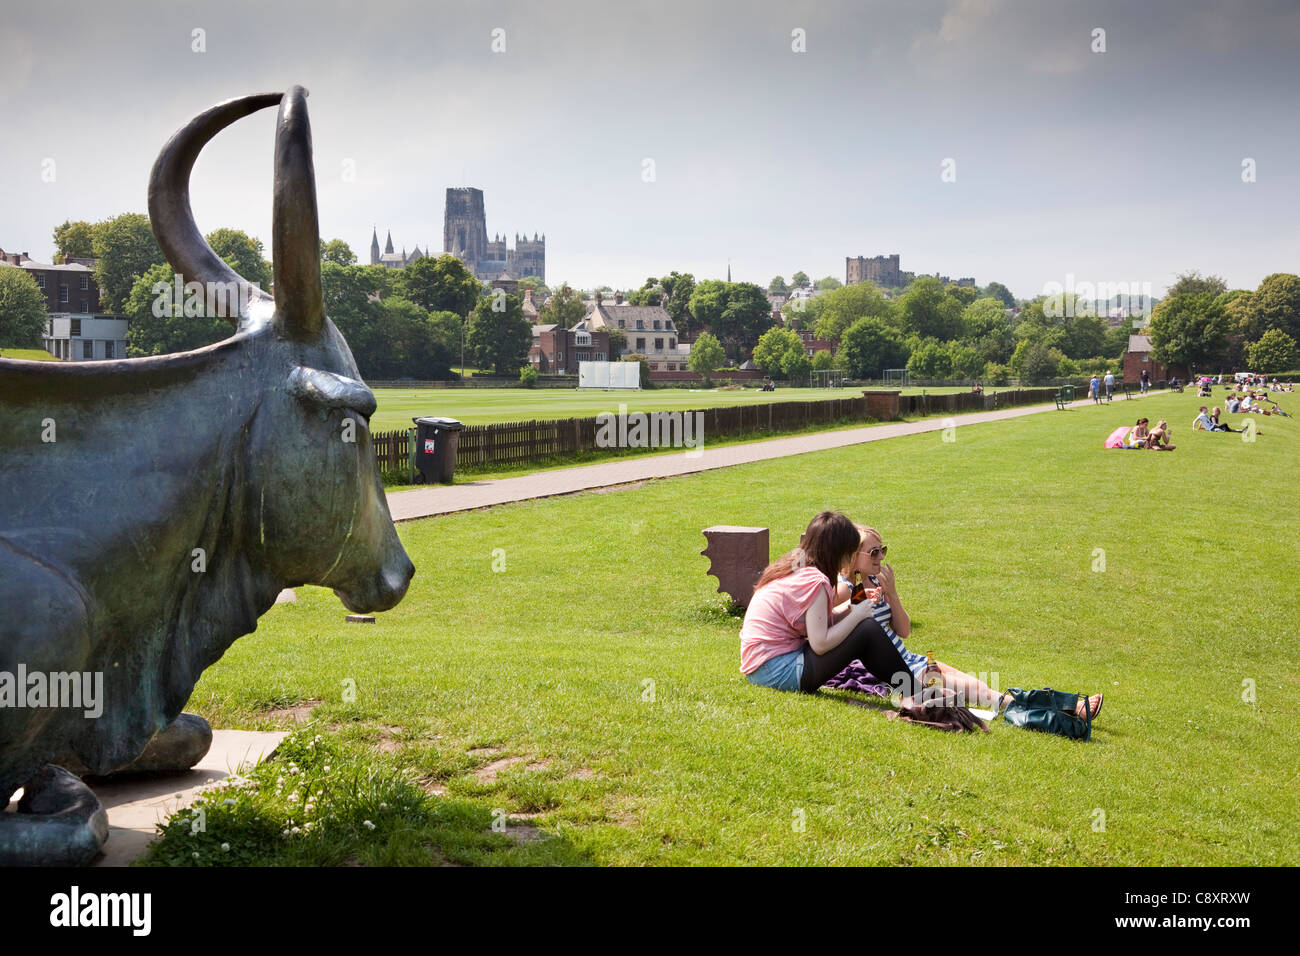 Durham Cathedral, Castle with Statue / Sculpture of 'Dunn Cow' and students sat drinking by the riverside, Durham, England Stock Photo